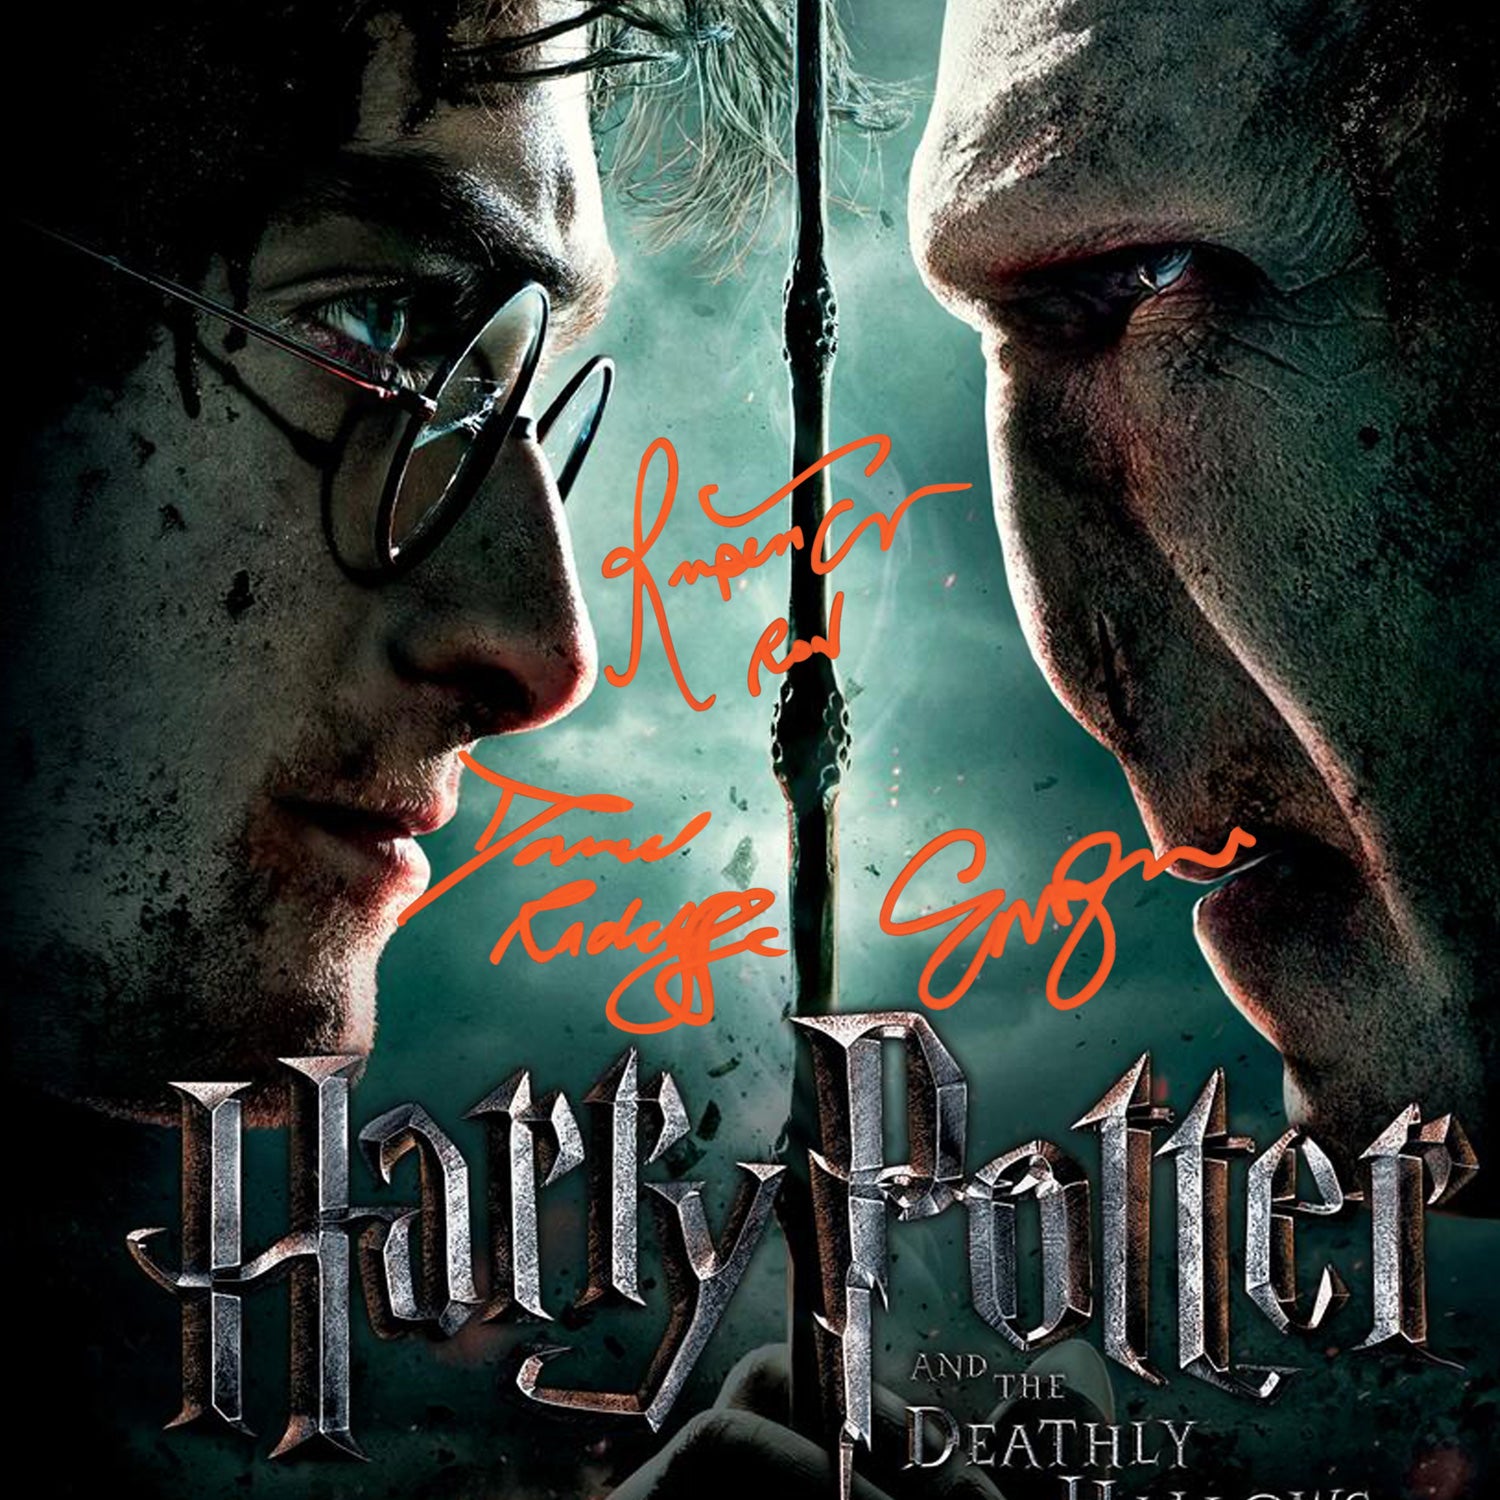 harry potter deathly hallows part 2 length